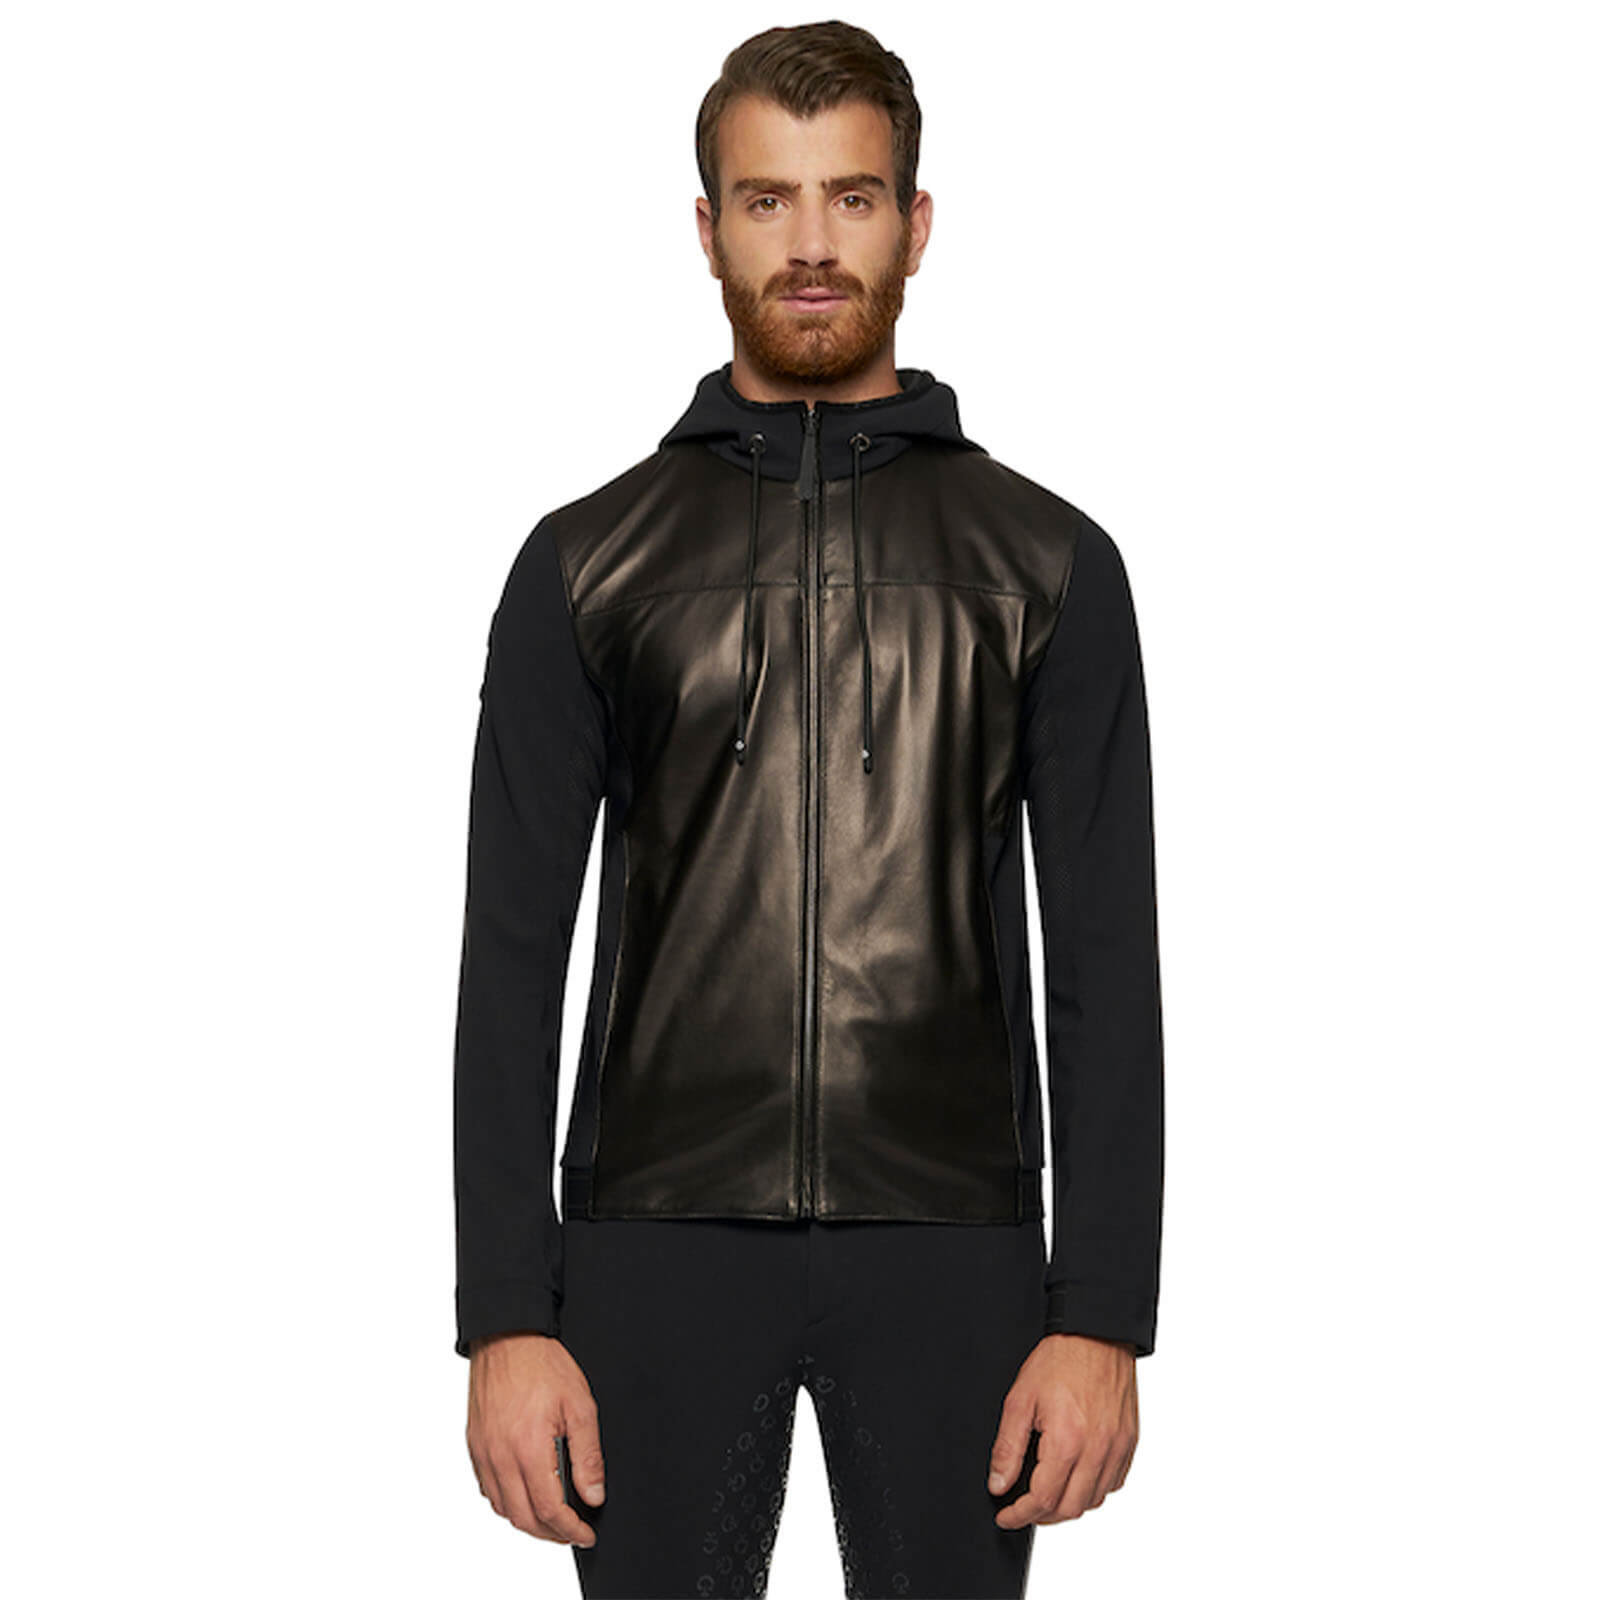 Men's leather jacket with style and function